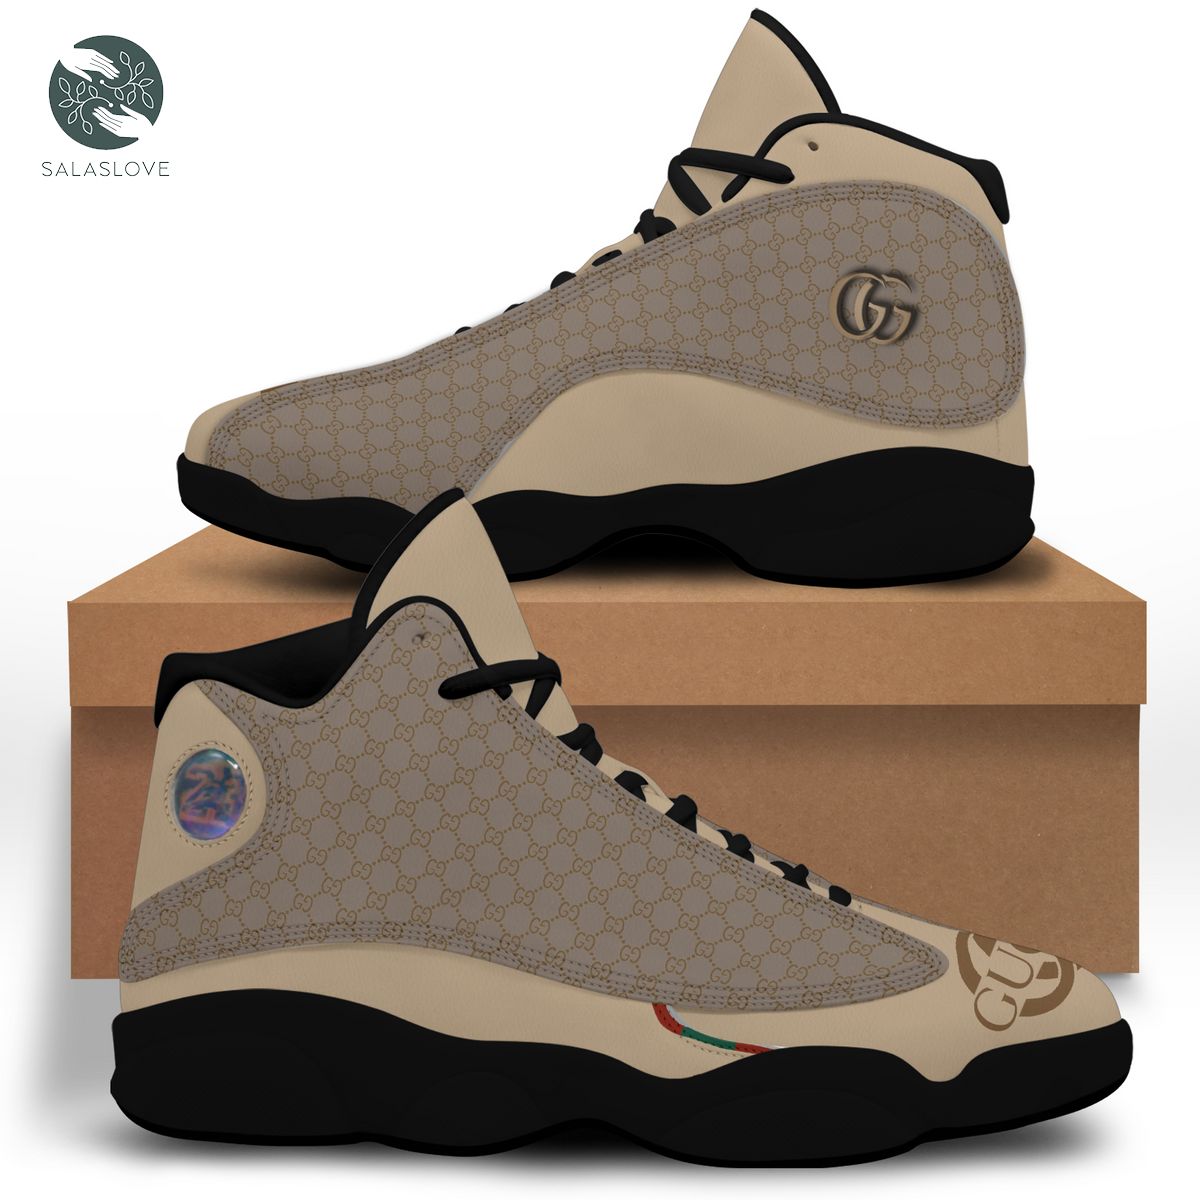 Luxury Brand Gucci Air Jordan 13 Sneakers Shoes Gifts